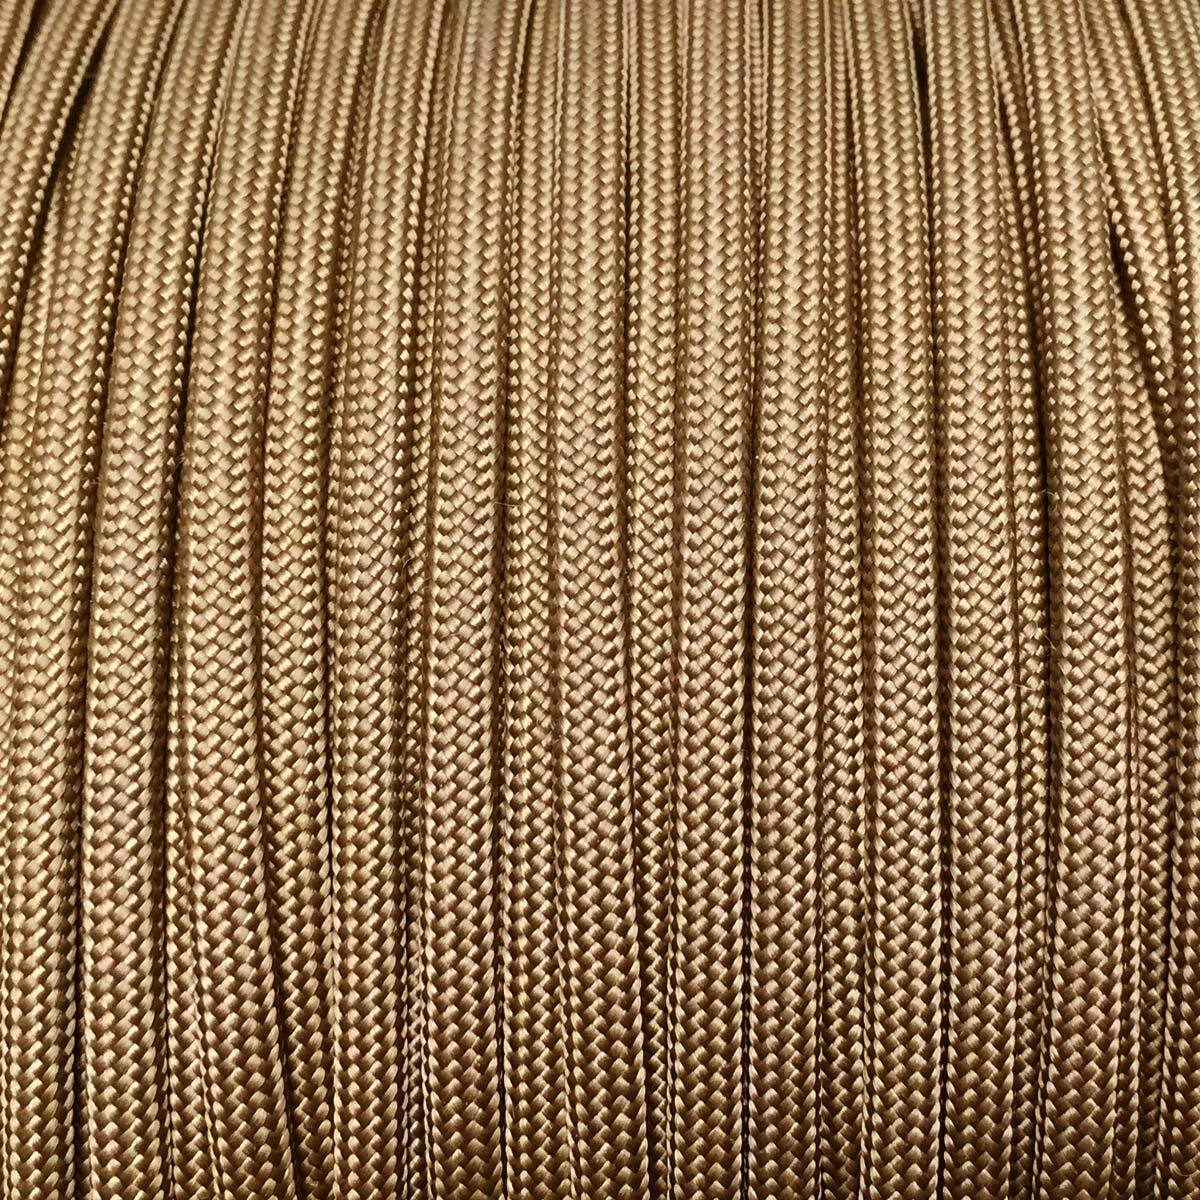 Extac Australia - Paracord 1000ft Coyote Brown